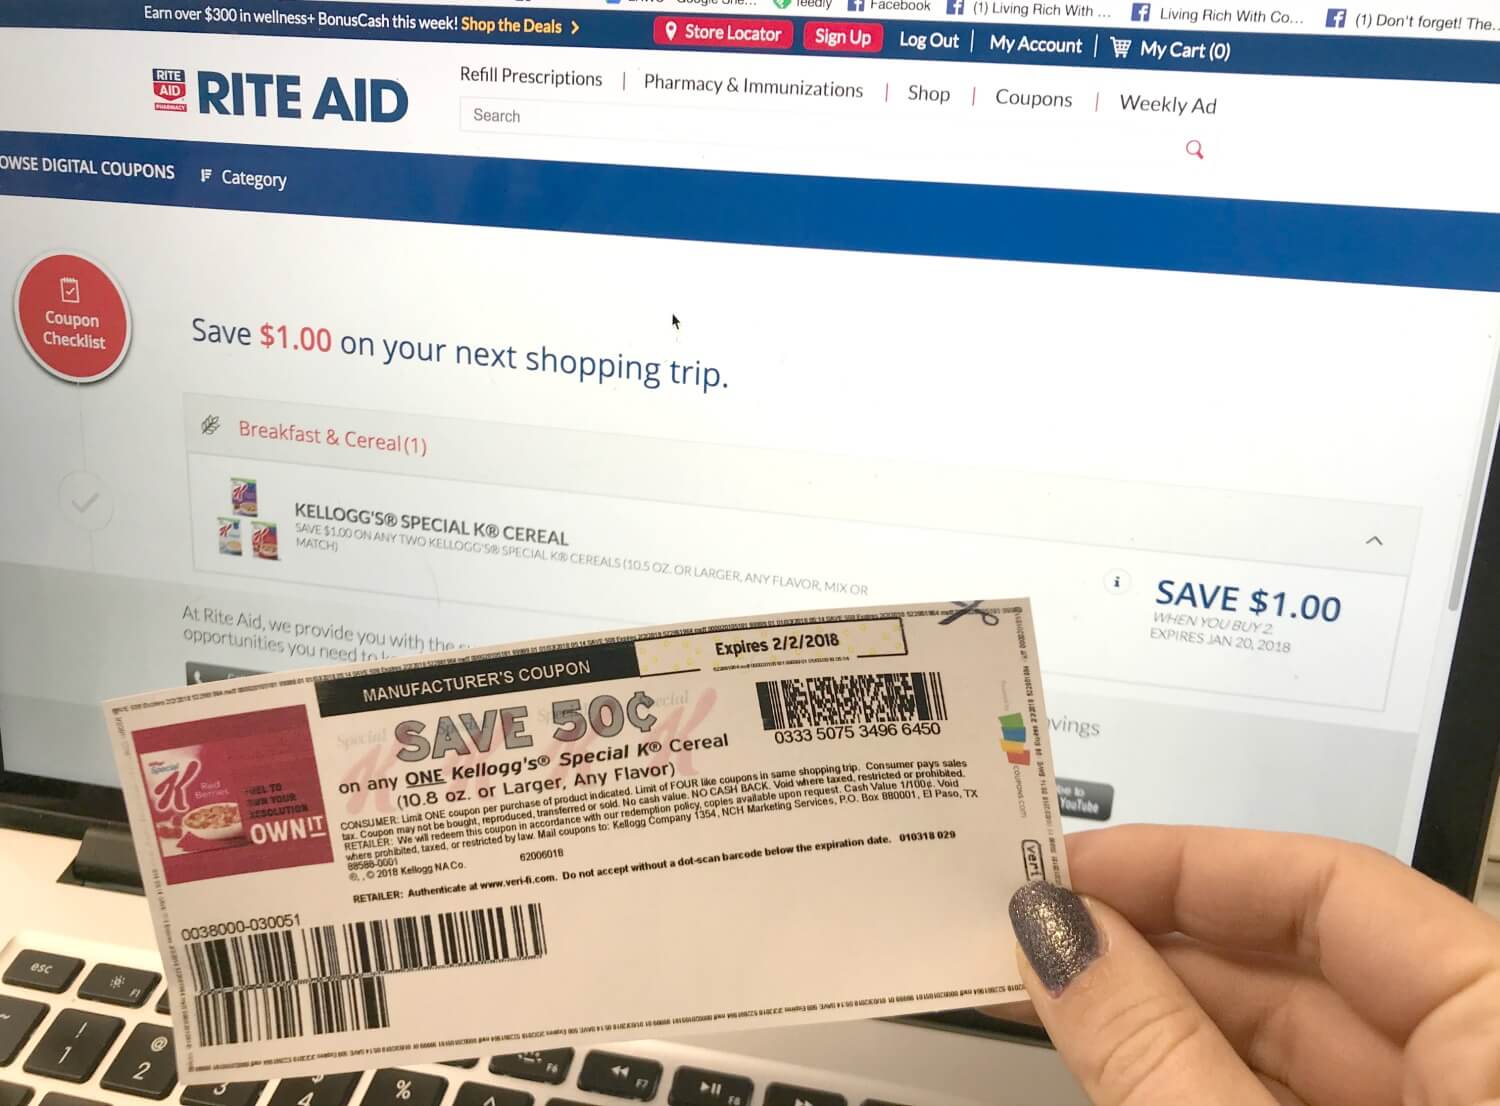 Rite Aid Shoppers Can Now Stack Load2Card Coupons Plus wellness Bonus